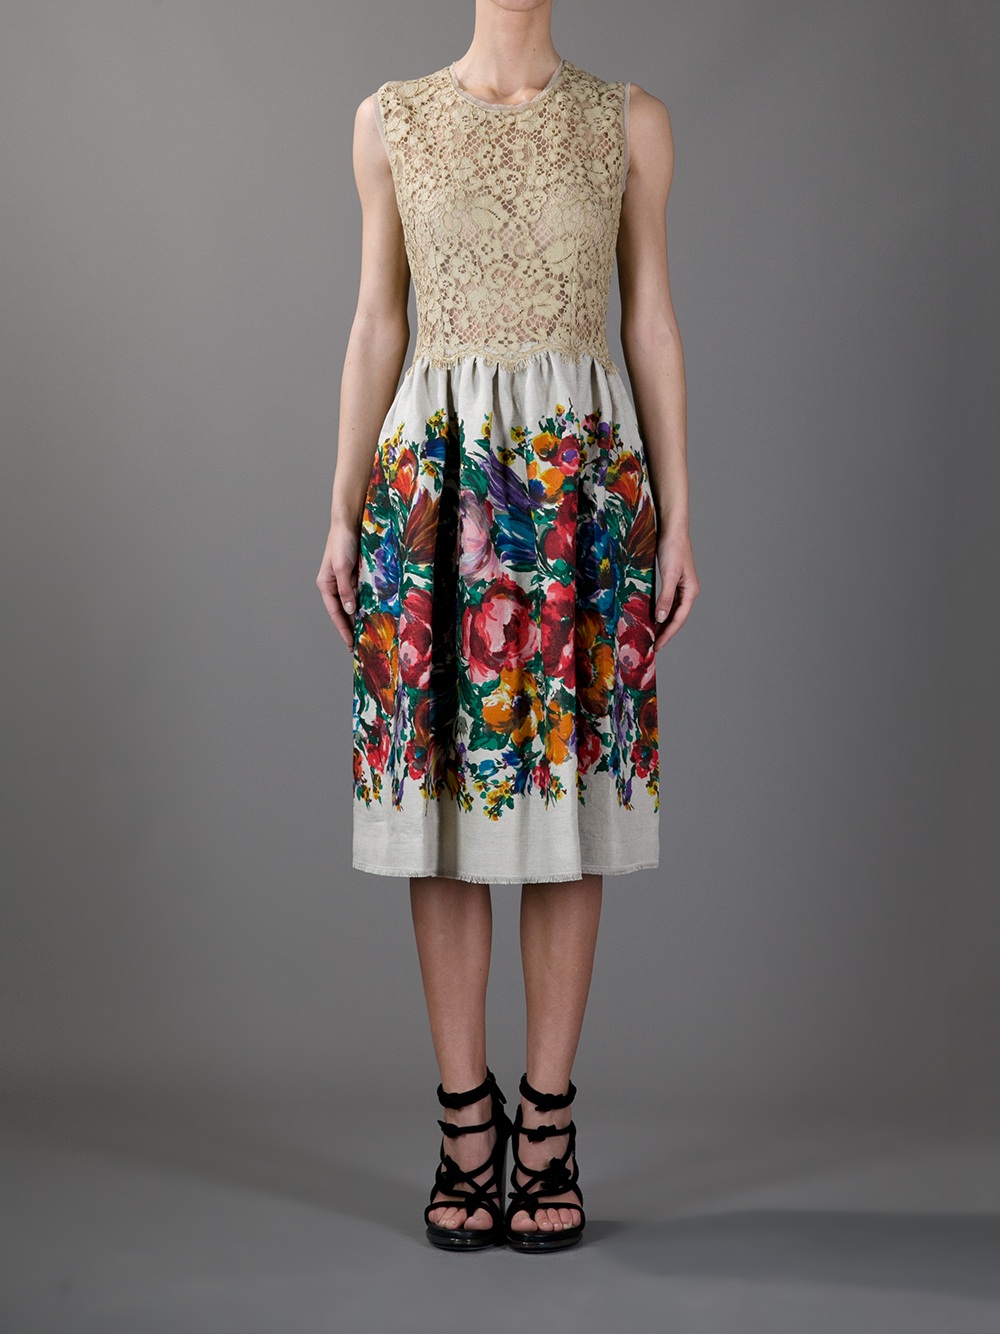 Dolce & Gabbana Floral Print and Lace Dress - Lyst